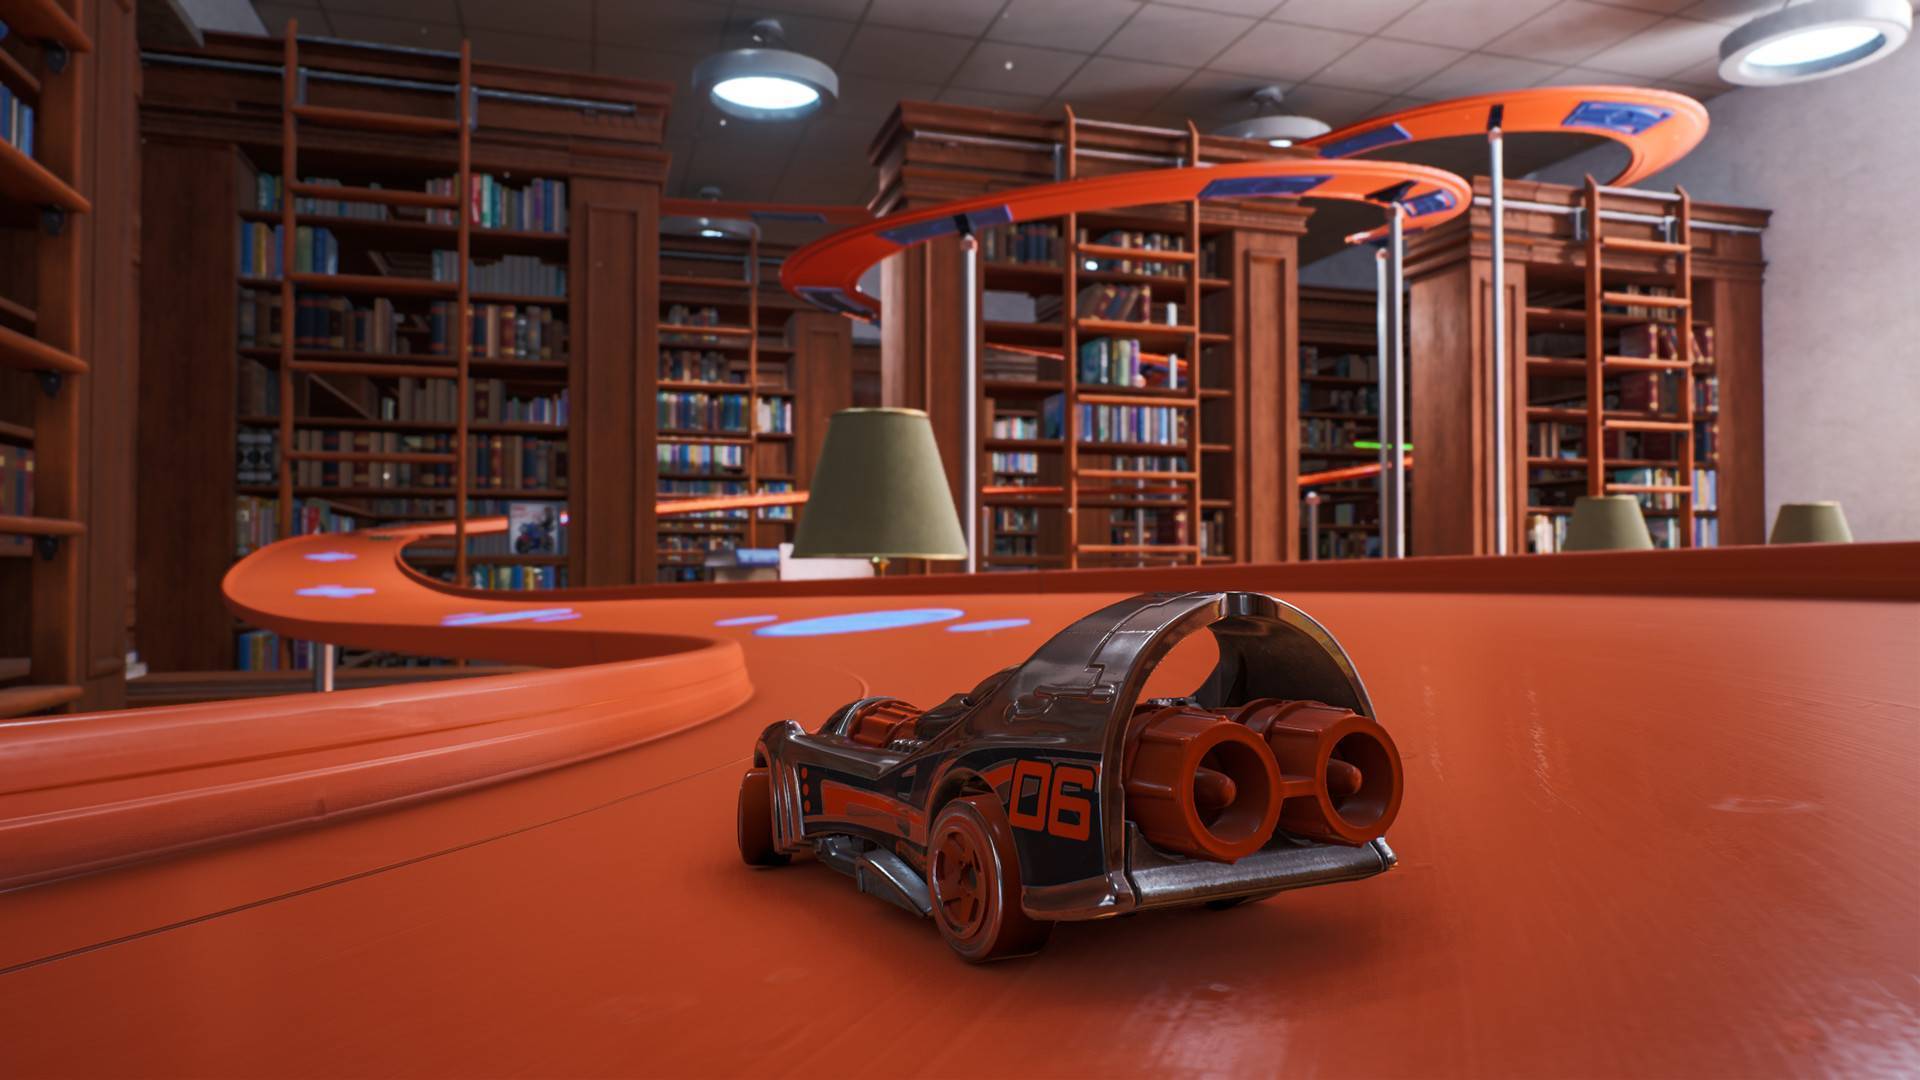 download hot wheels unleashed xbox one for free